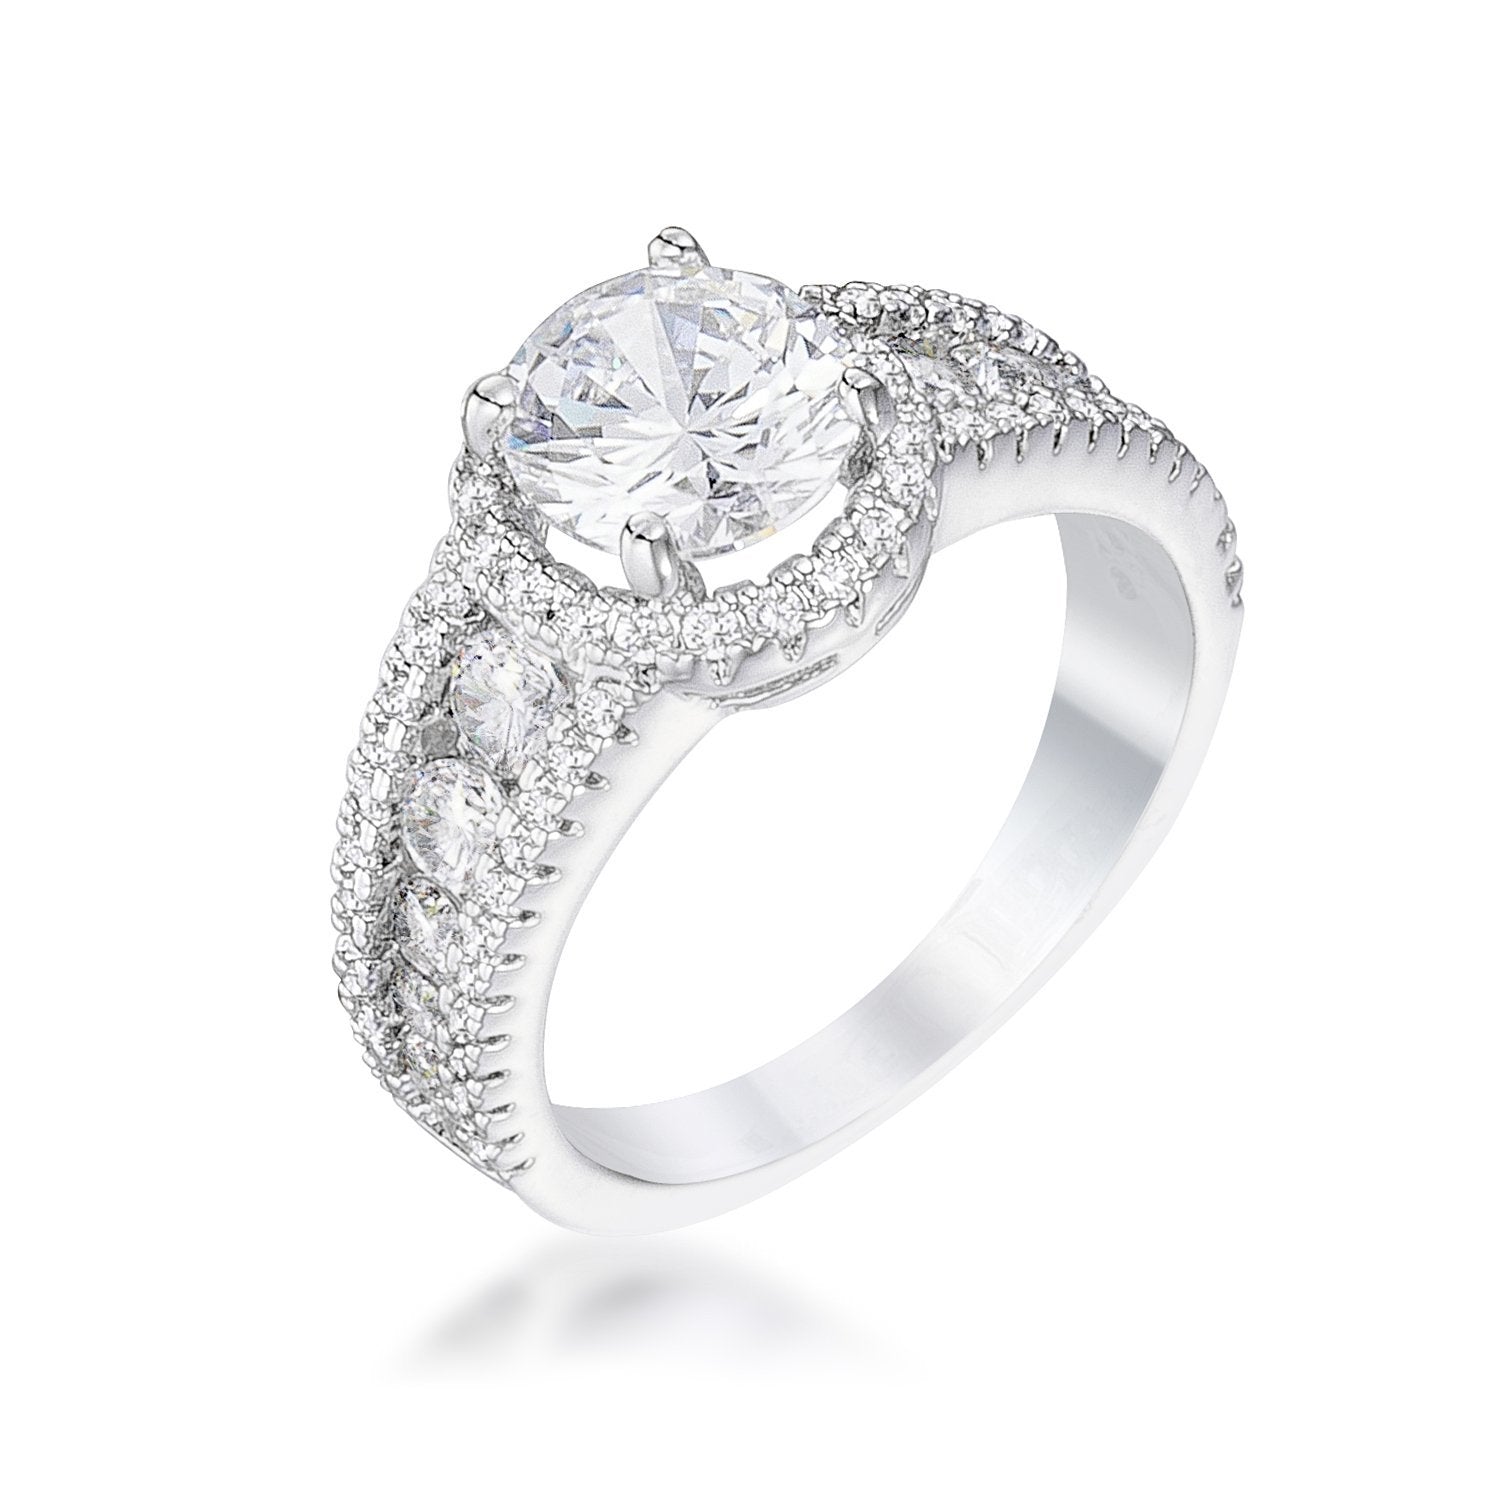 2.1Ct Rhodium Plated Solitaire Engagement Halo Ring